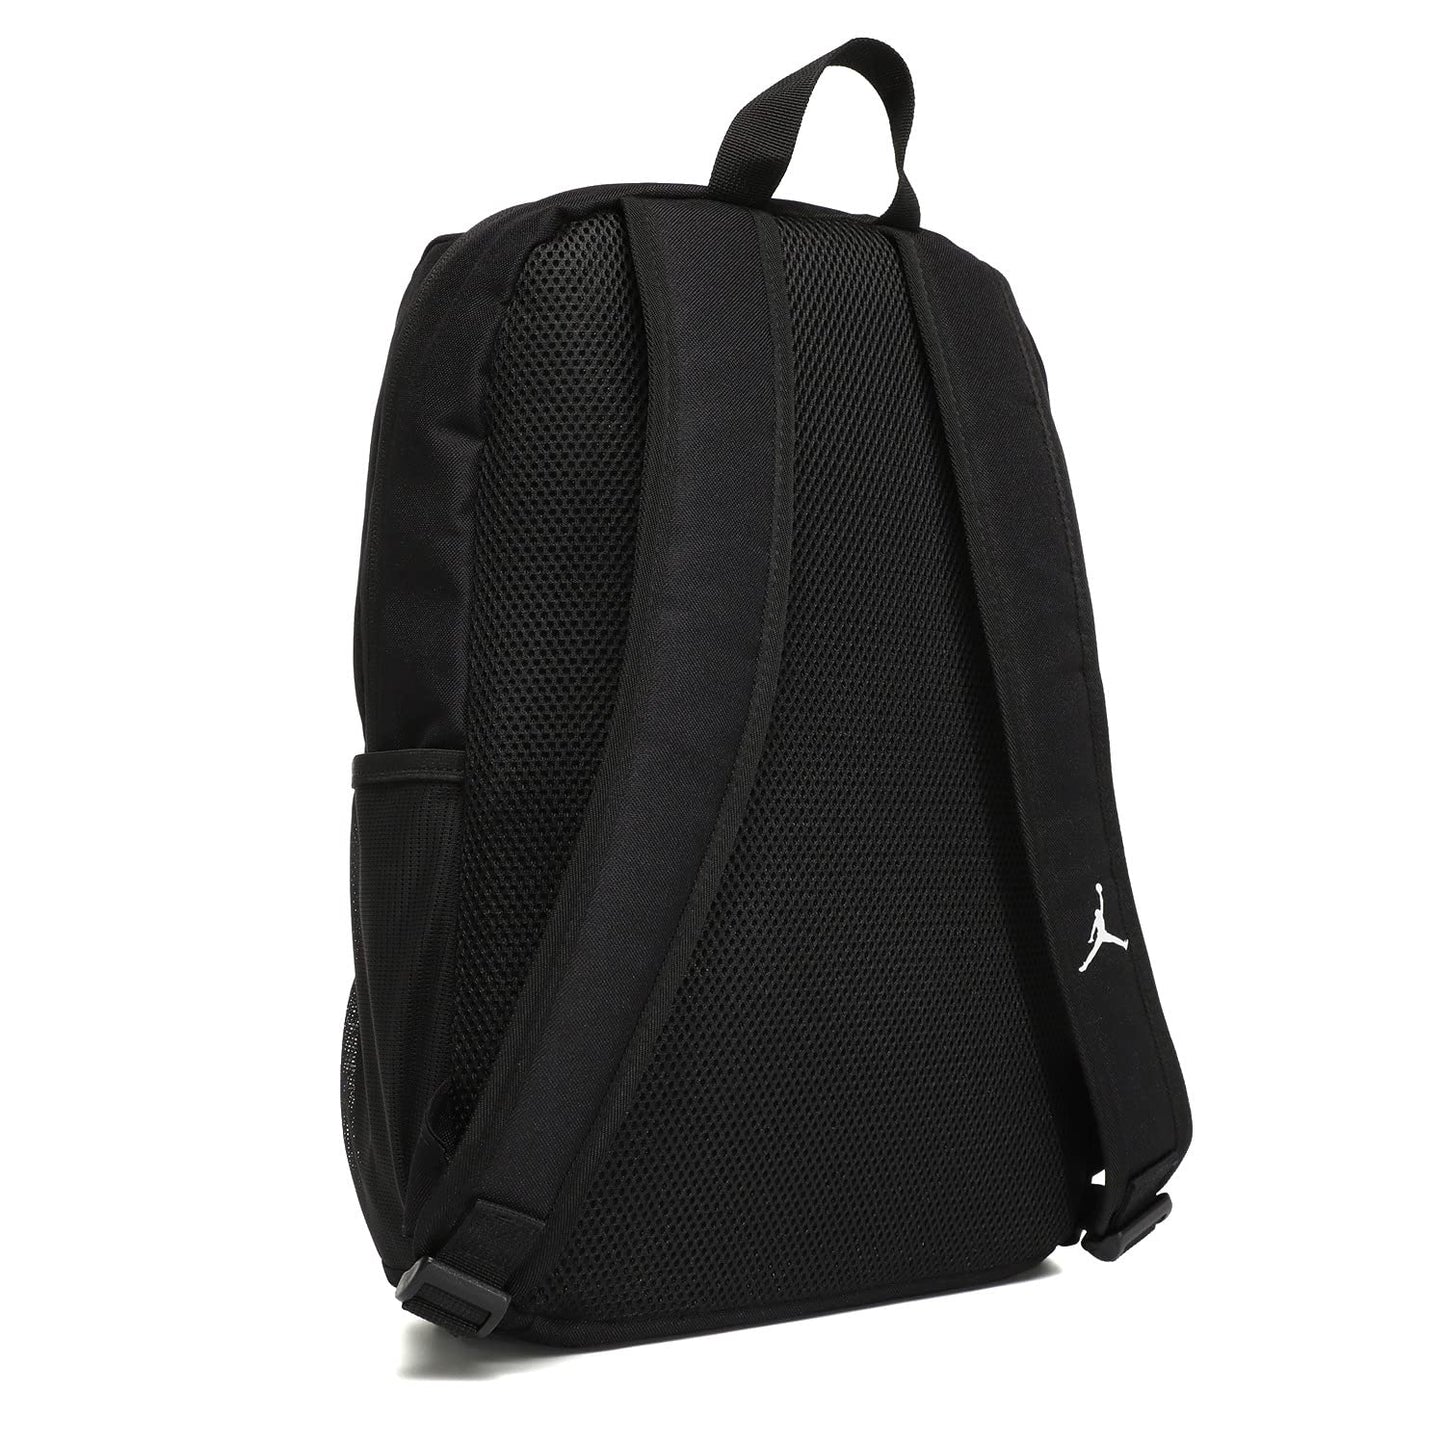 Image 2 of Zion Essentials Backpack